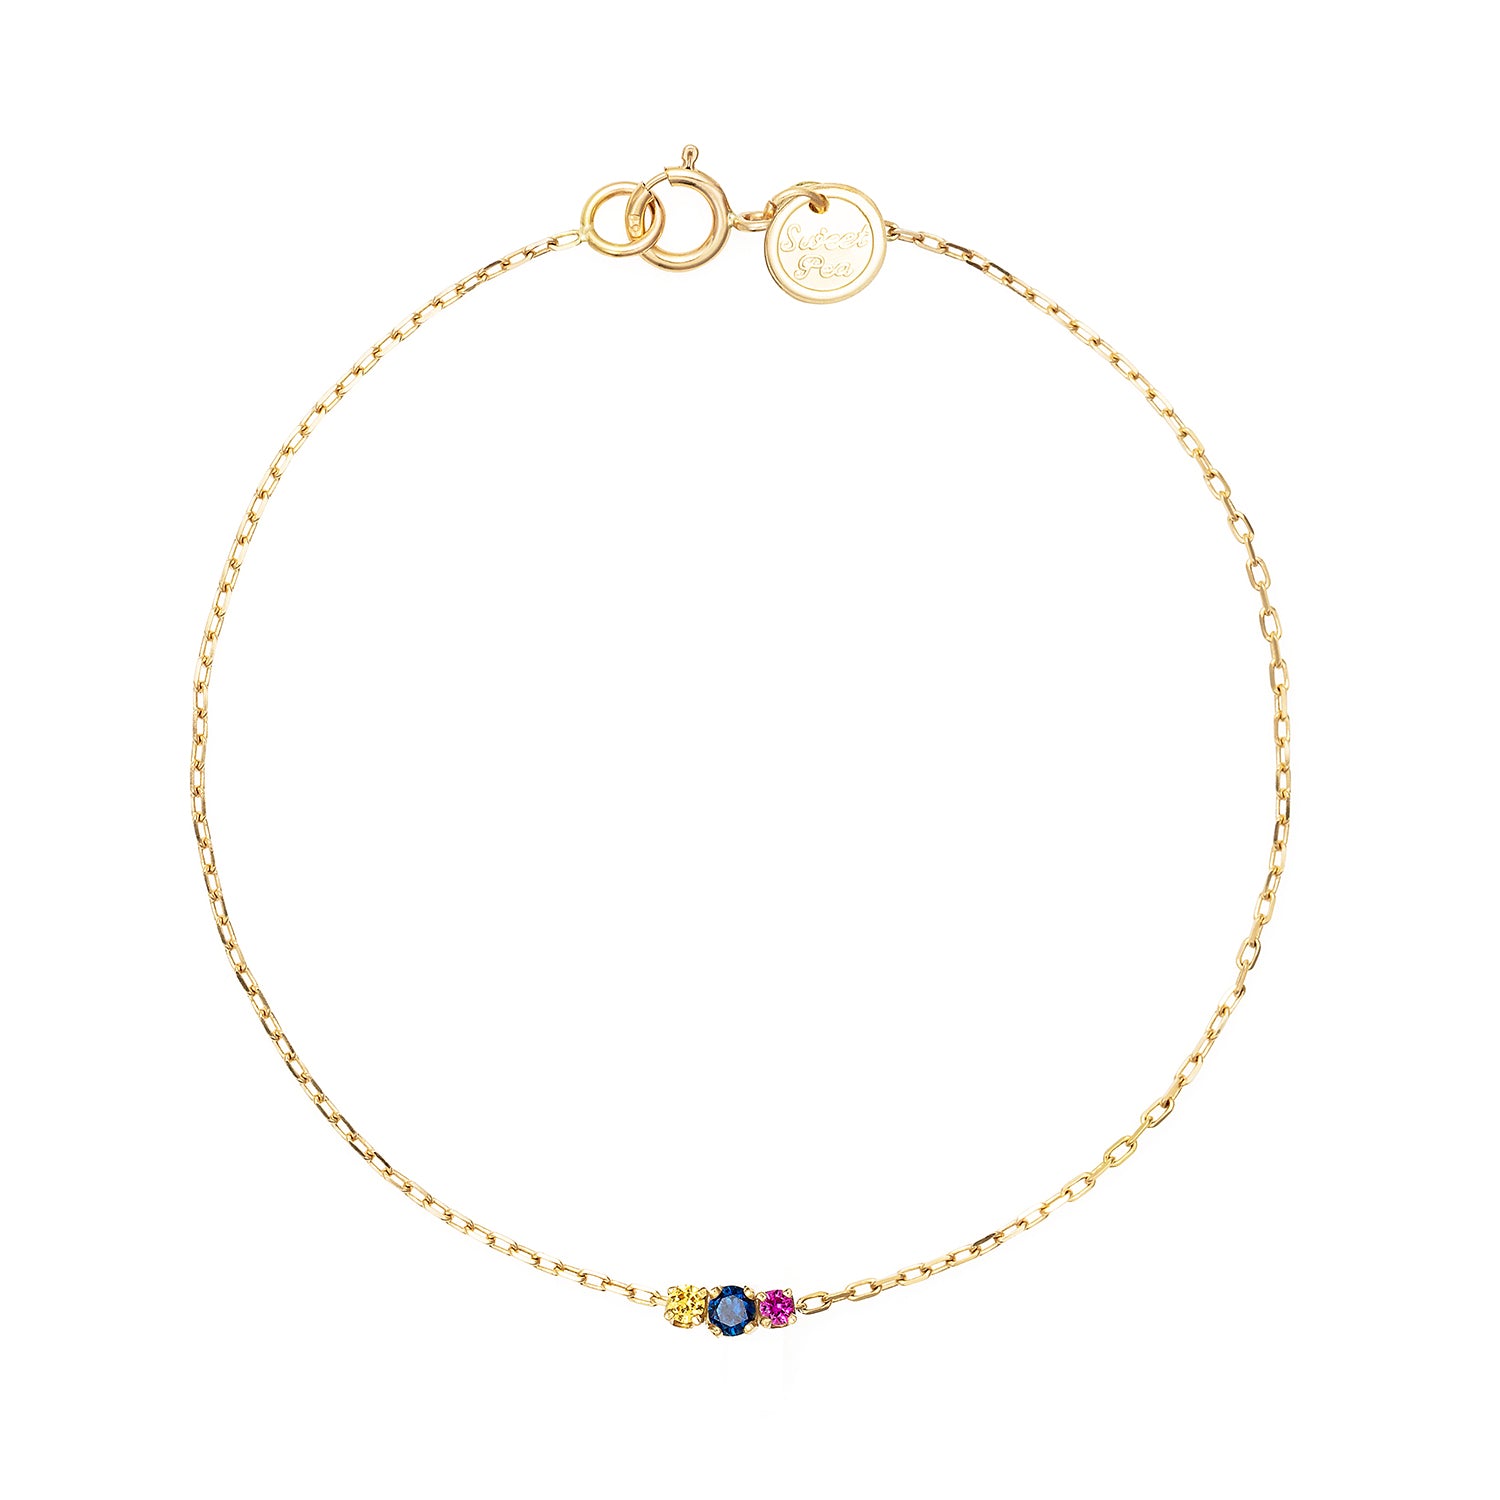 18ct yellow gold chain bracelet with horizontal set pink blue and yellow sapphire bar.